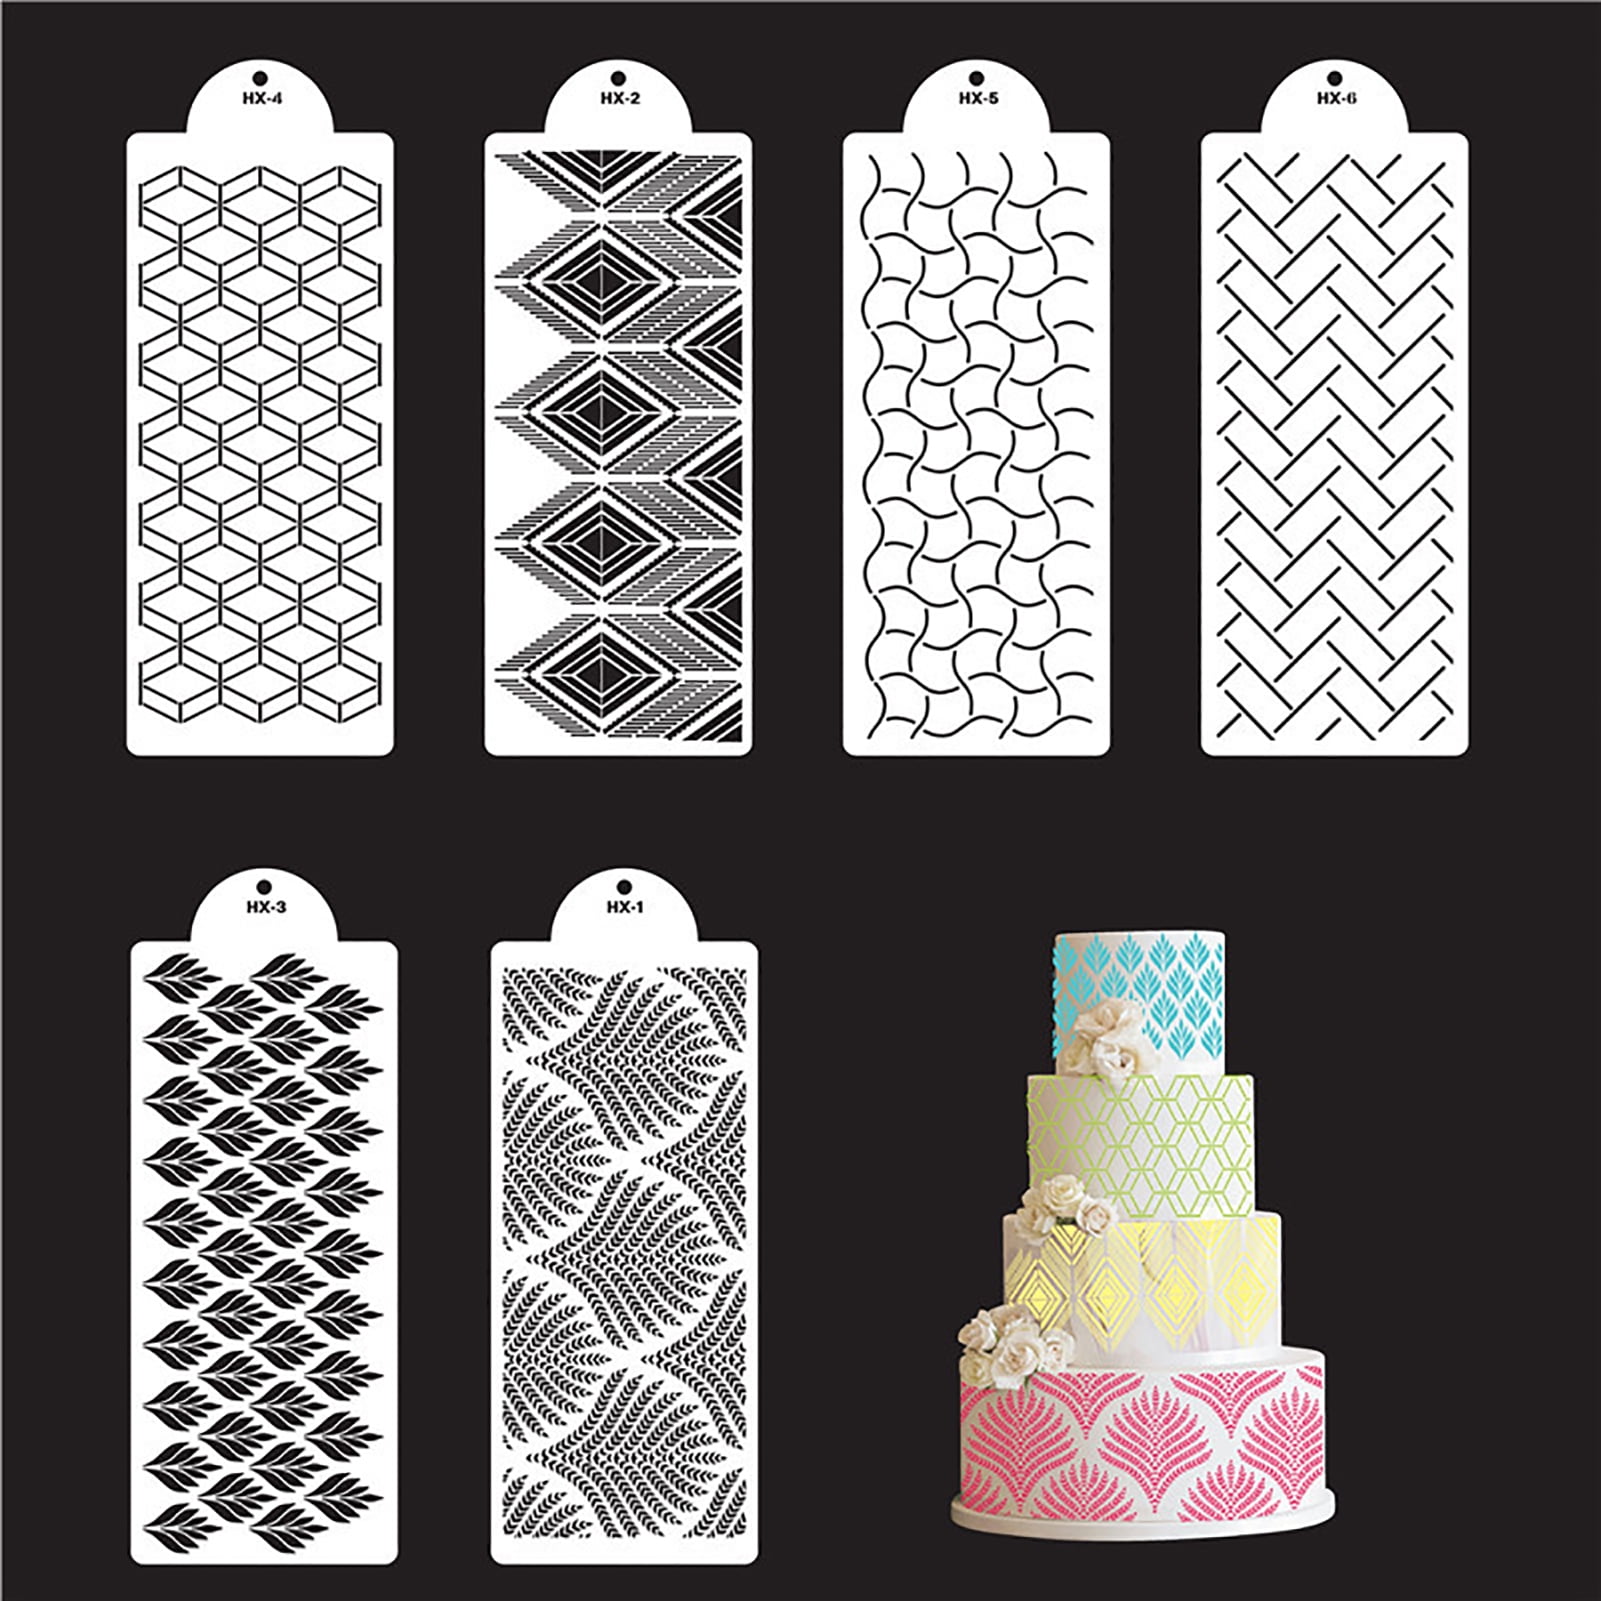 Travelwant 3Packs Wedding Cake Stencil Template,Wheat Spike Pattern Cake Stencil Mold Plastic Spray Lace Cake Stencils Template Drawing Mould,Cake